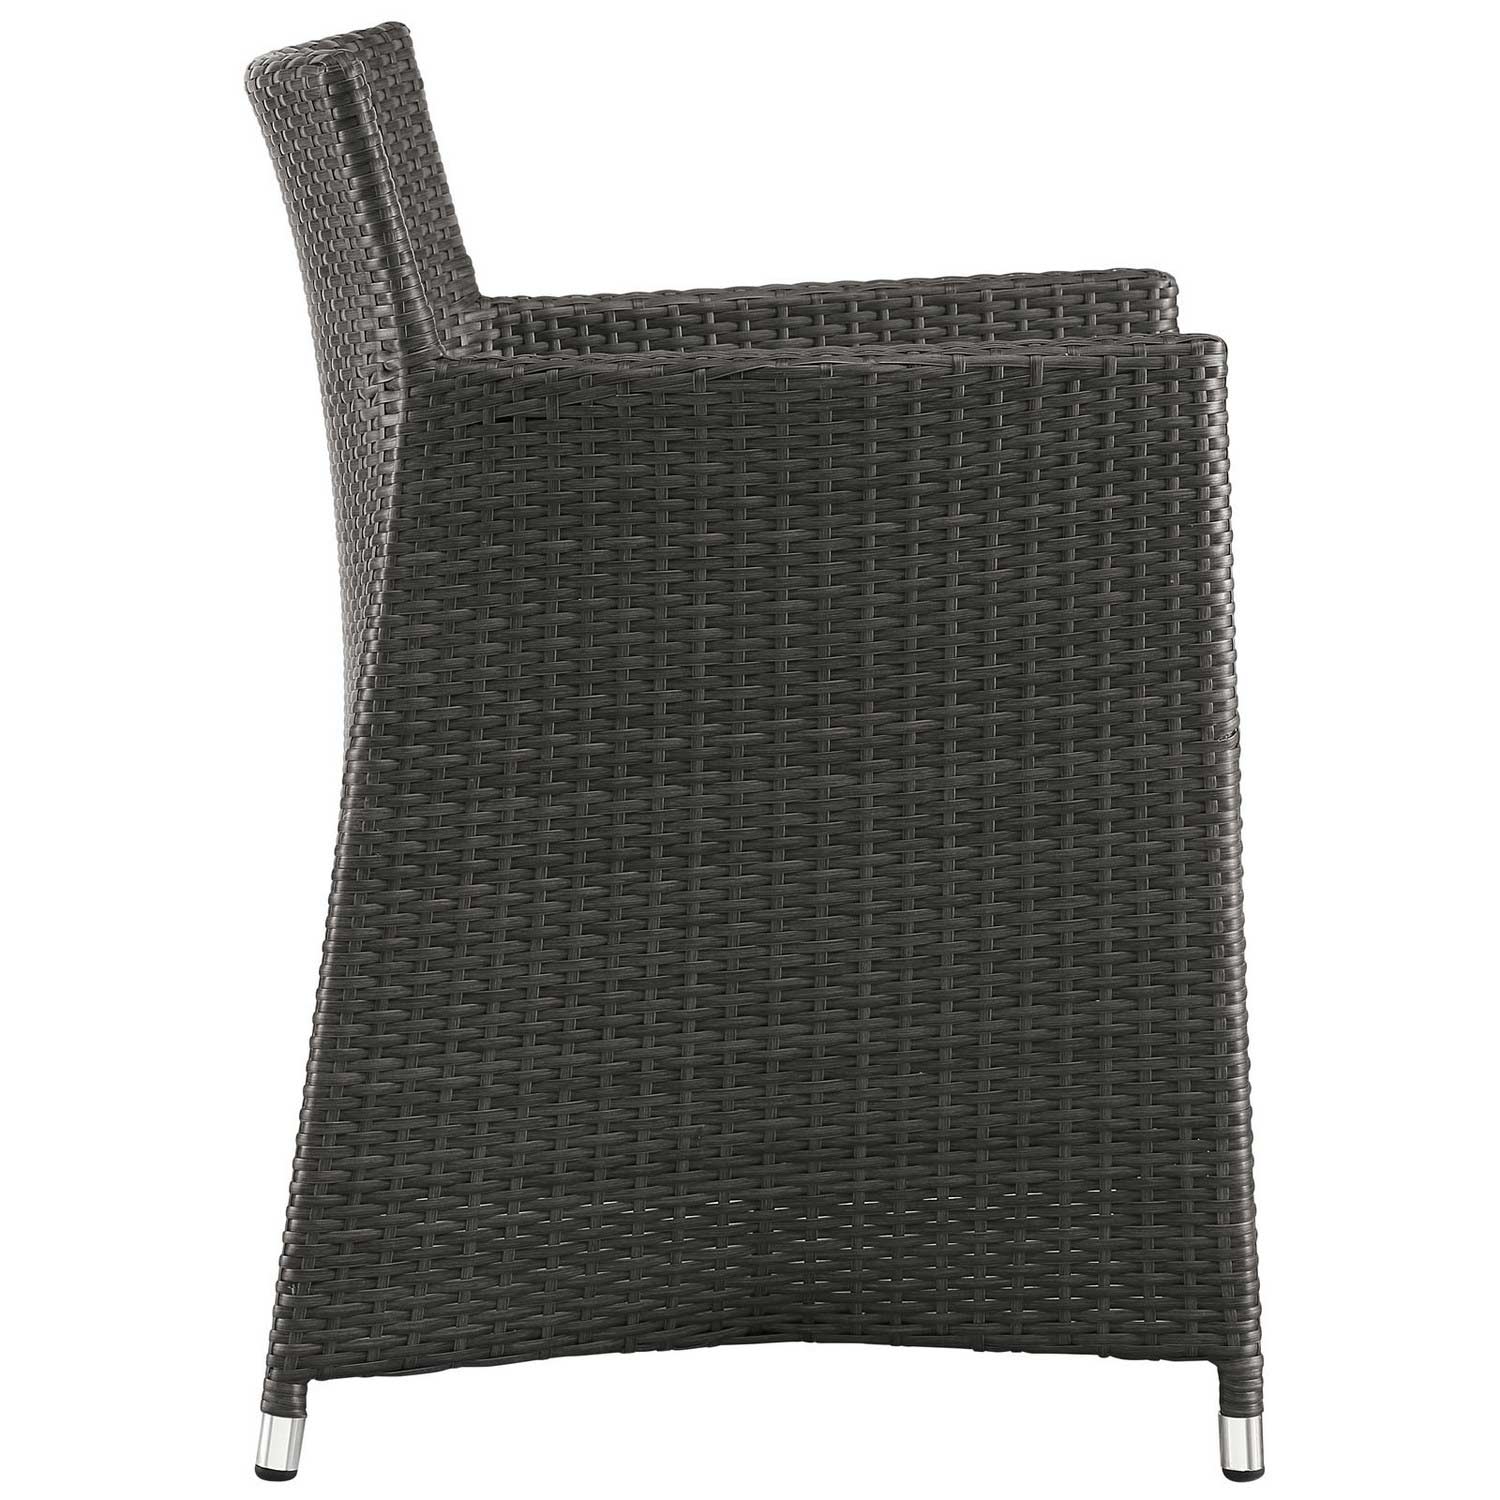 Modway Junction Outdoor Patio Armchair - Brown/White